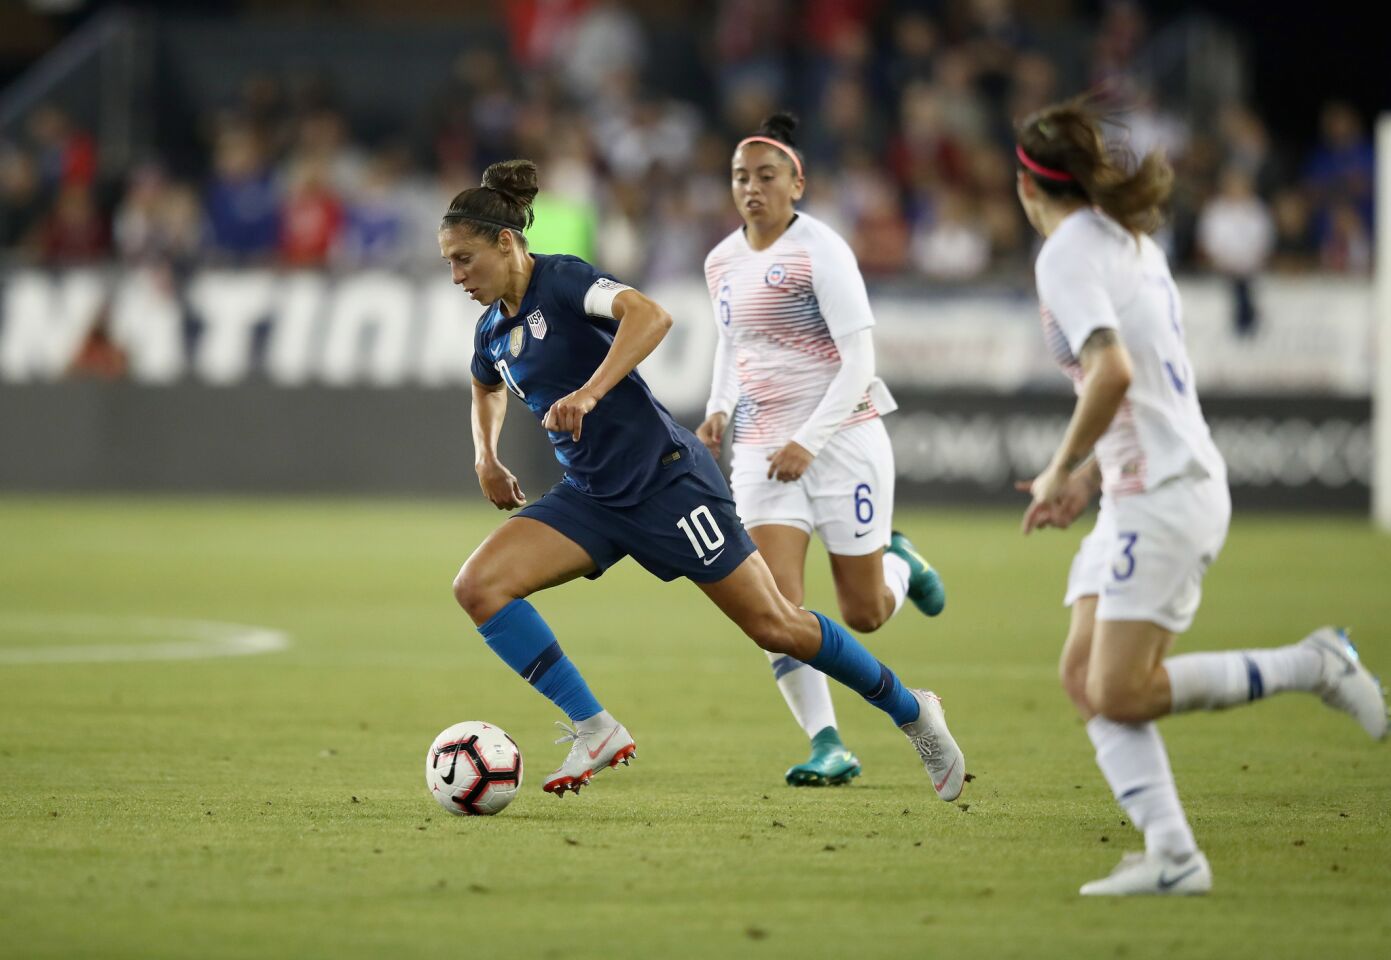 SAN JOSE, CA - SEPTEMBER 04: Carli Lloyd of the United States dribbles past Claudia Soto of Chile during their match at Avaya Stadium on September 4, 2018 in San Jose, California. (Photo by Ezra Shaw/Getty Images) ** OUTS - ELSENT, FPG, CM - OUTS * NM, PH, VA if sourced by CT, LA or MoD **